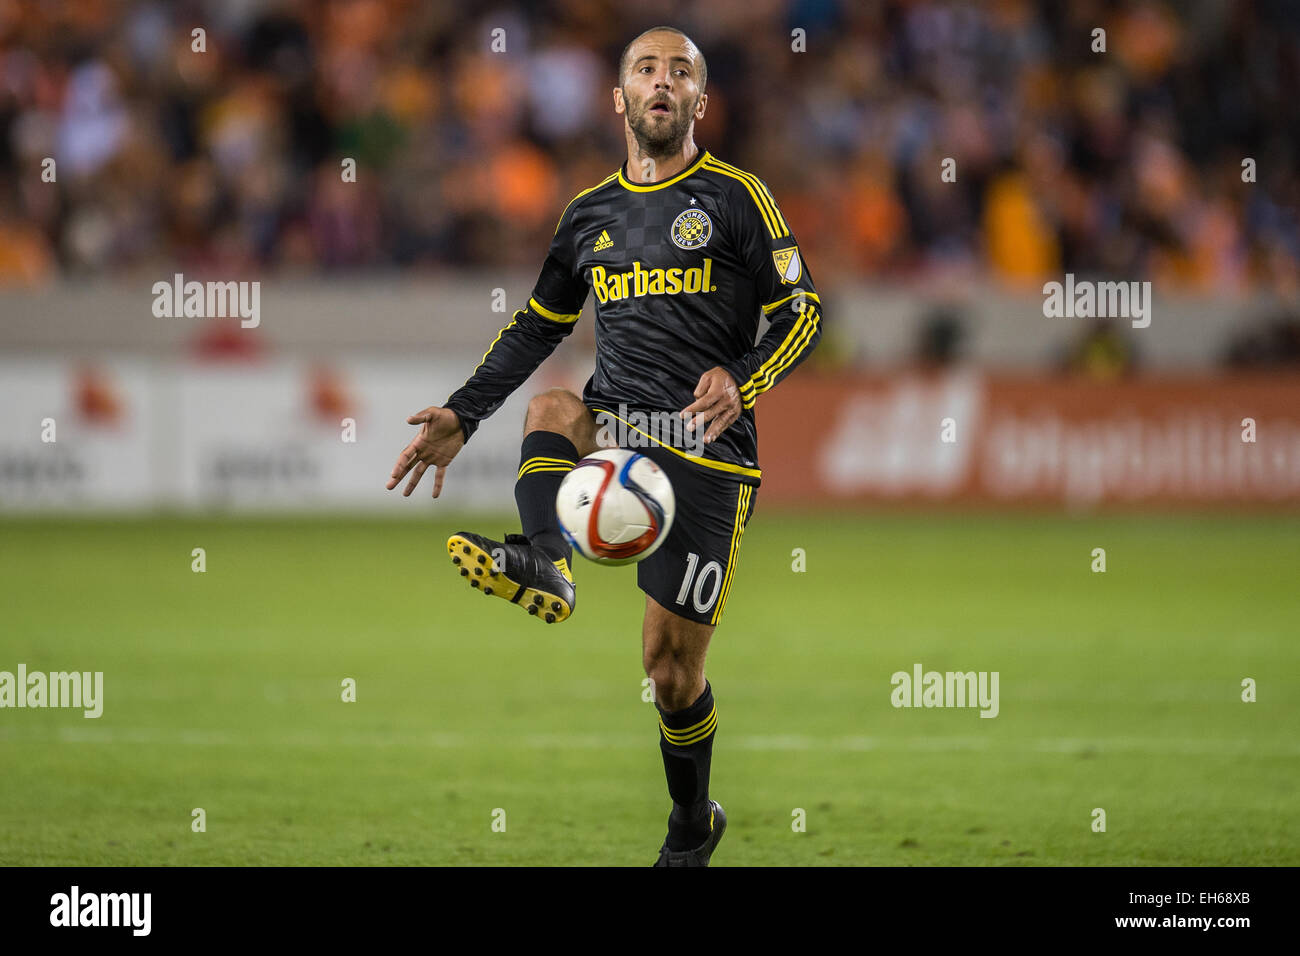 Houston, Texas, USA. 7th Mar, 2015. Columbus Crew forward Federico Higuain (10) controls the ball during an MLS game between the Houston Dynamo and the Columbus Crew at BBVA Compass Stadium in Houston, TX on March 7th, 2015. The Dynamo won 1-0. © Trask Smith/ZUMA Wire/Alamy Live News Stock Photo